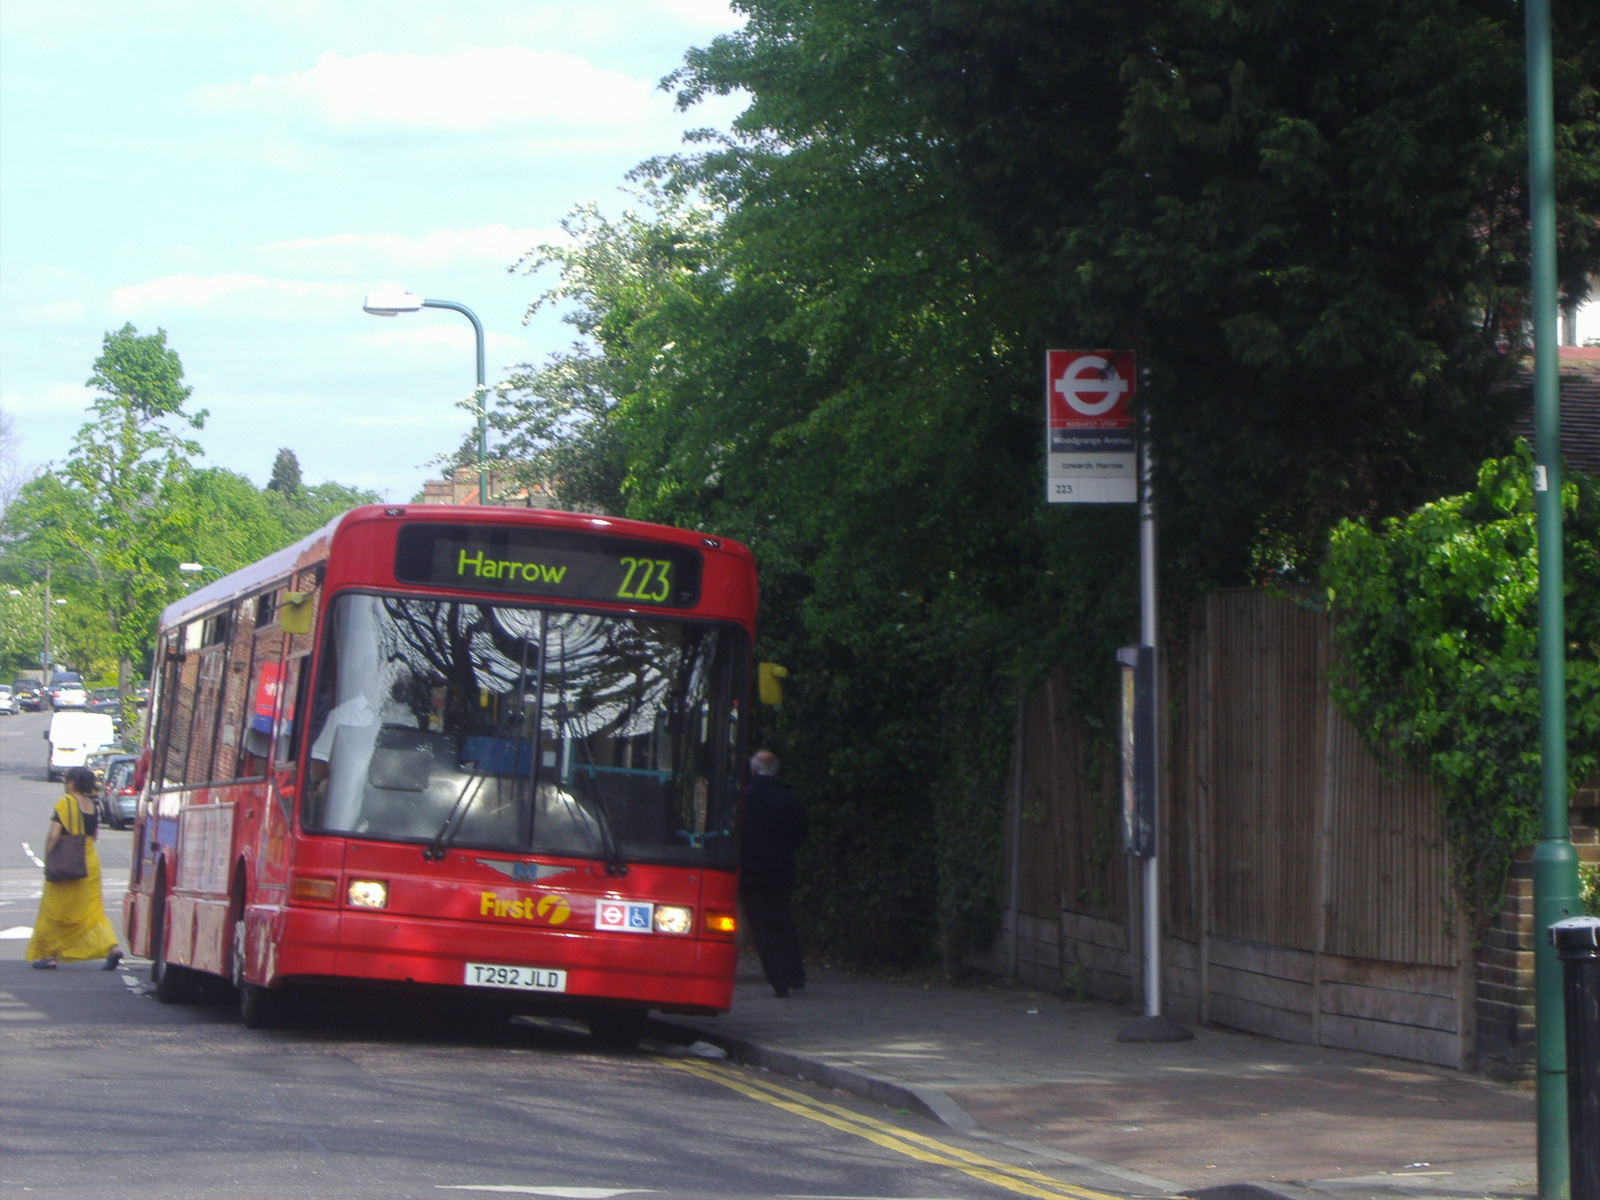 a red bus is stopped on the road for passengers